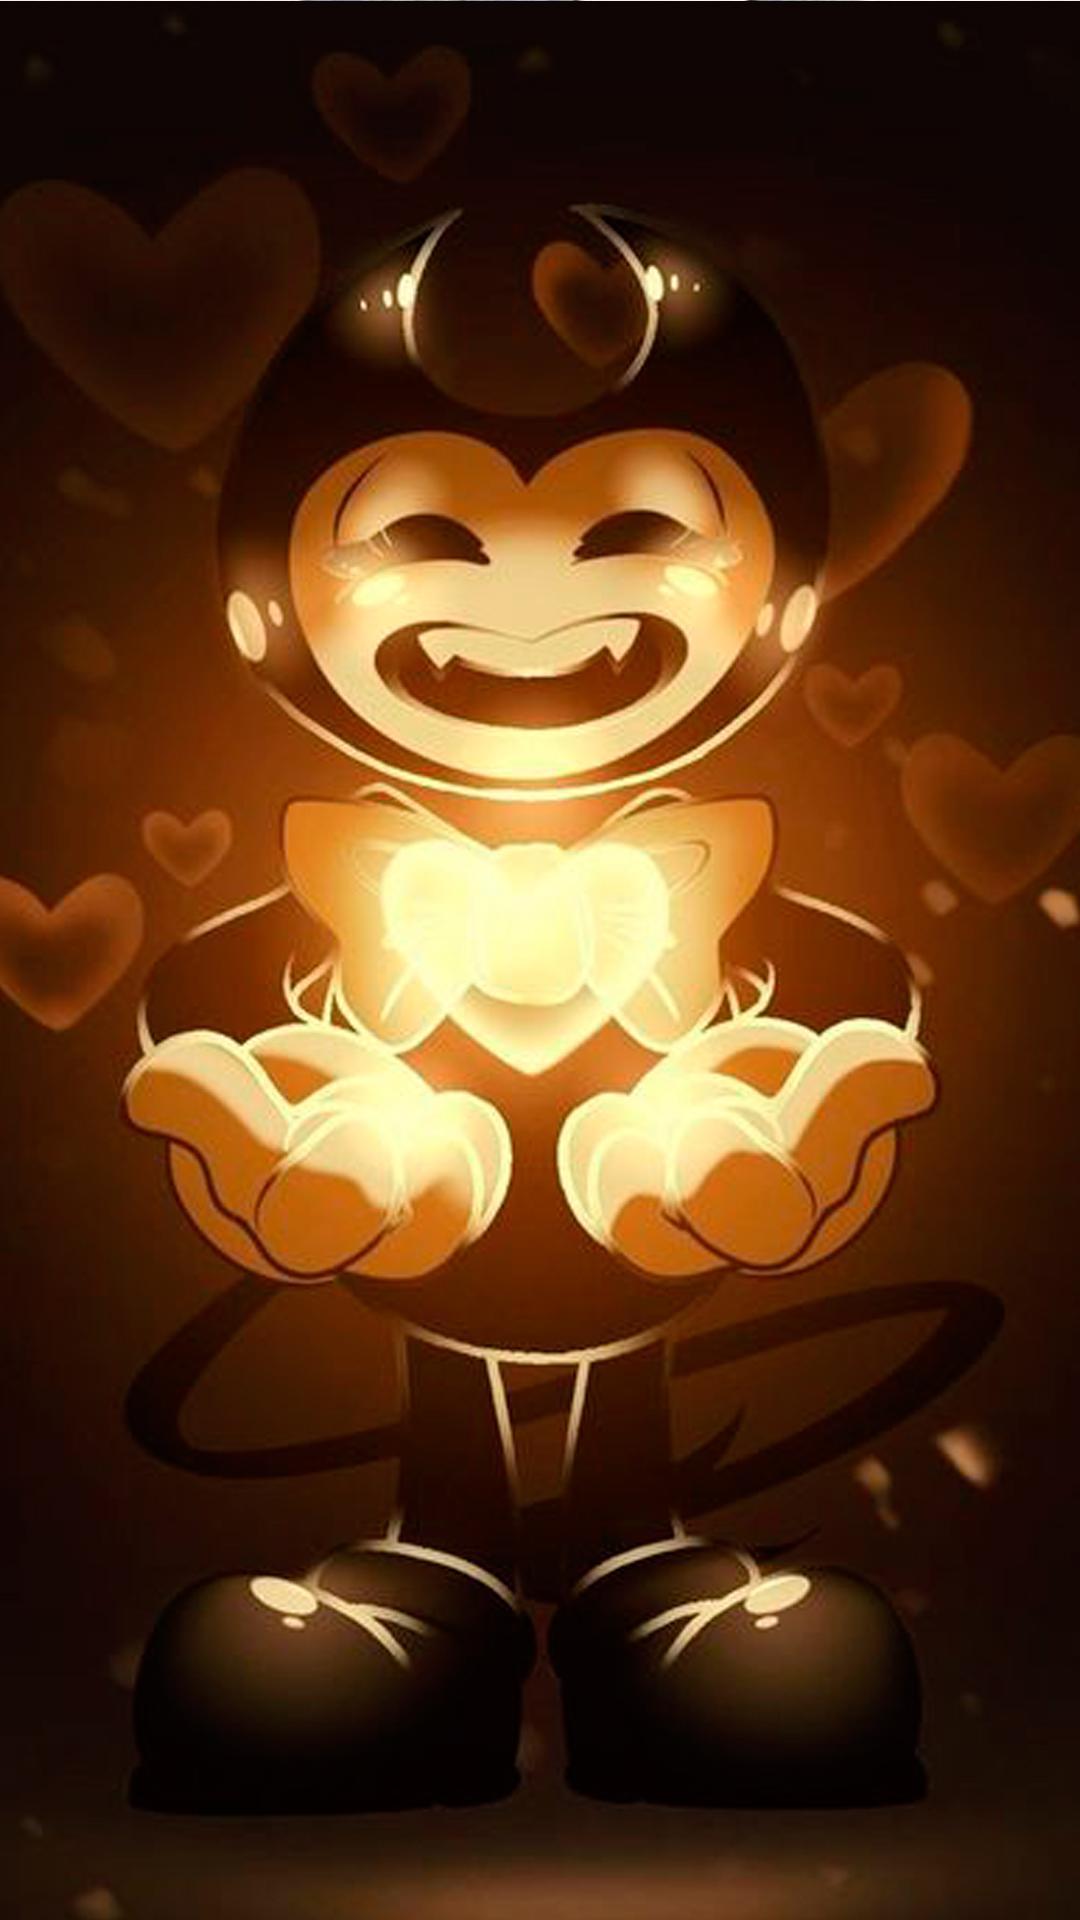 AFF on Twitter Wallpaper Bendy from Bendy and the Ink Machine Do you  have Bacon Soup BATIM Bendy Bendyandtheinkmachine Wallpaper Two  versions Normal and Darker httpstcobeLjrLLLzC  Twitter